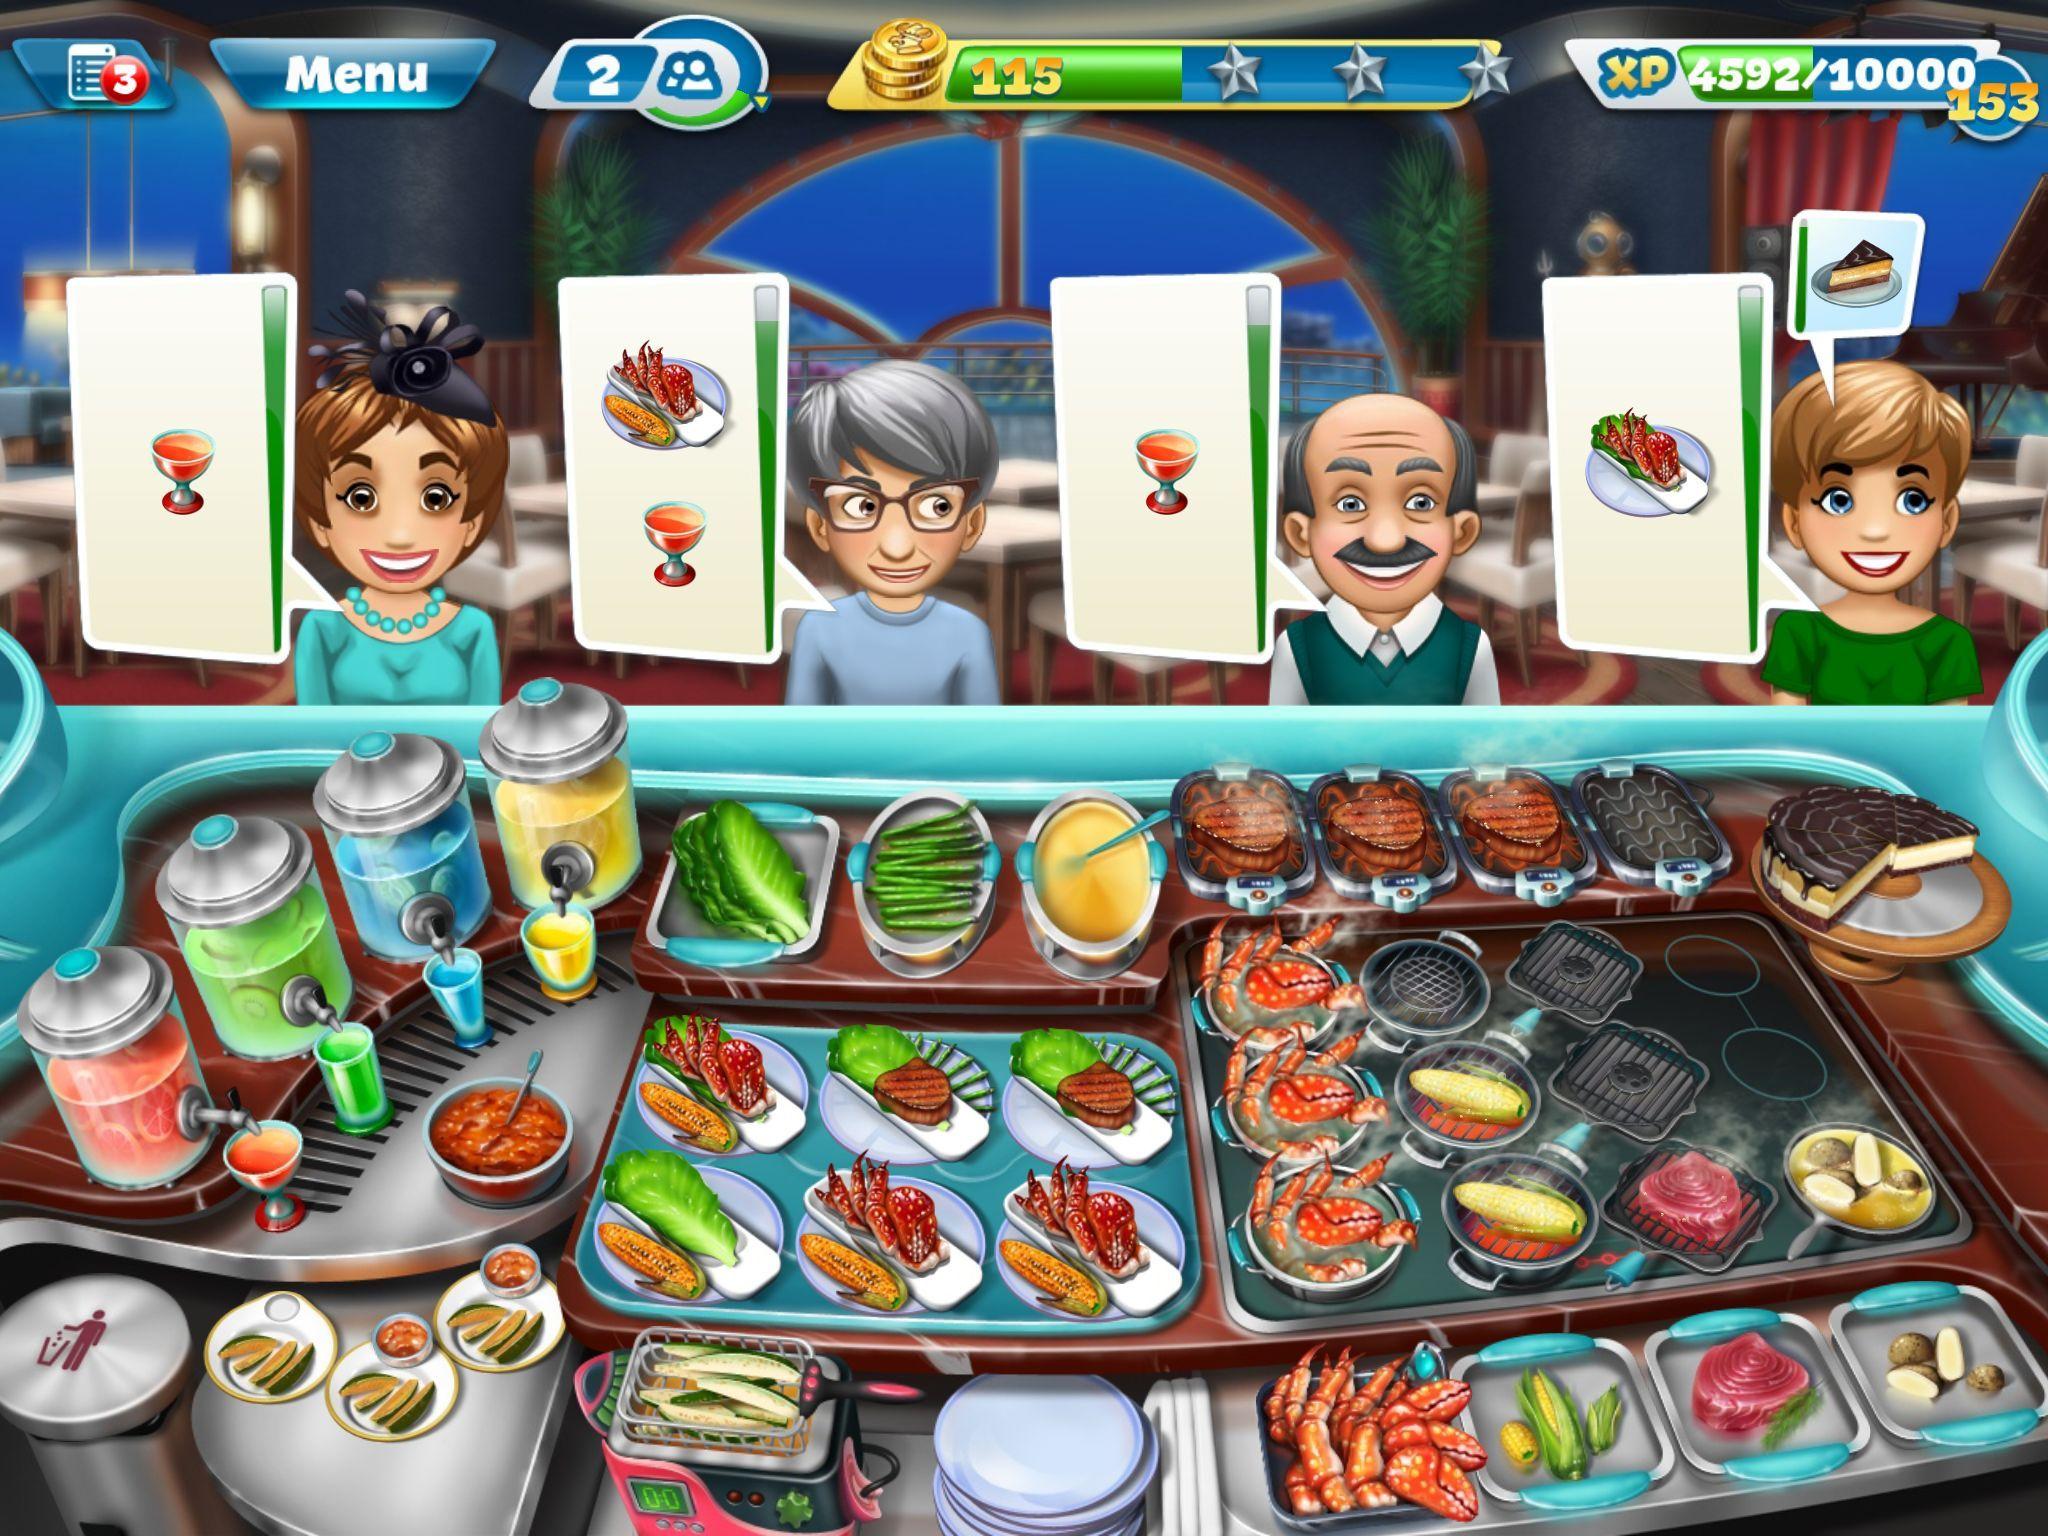 tips to cooking fever